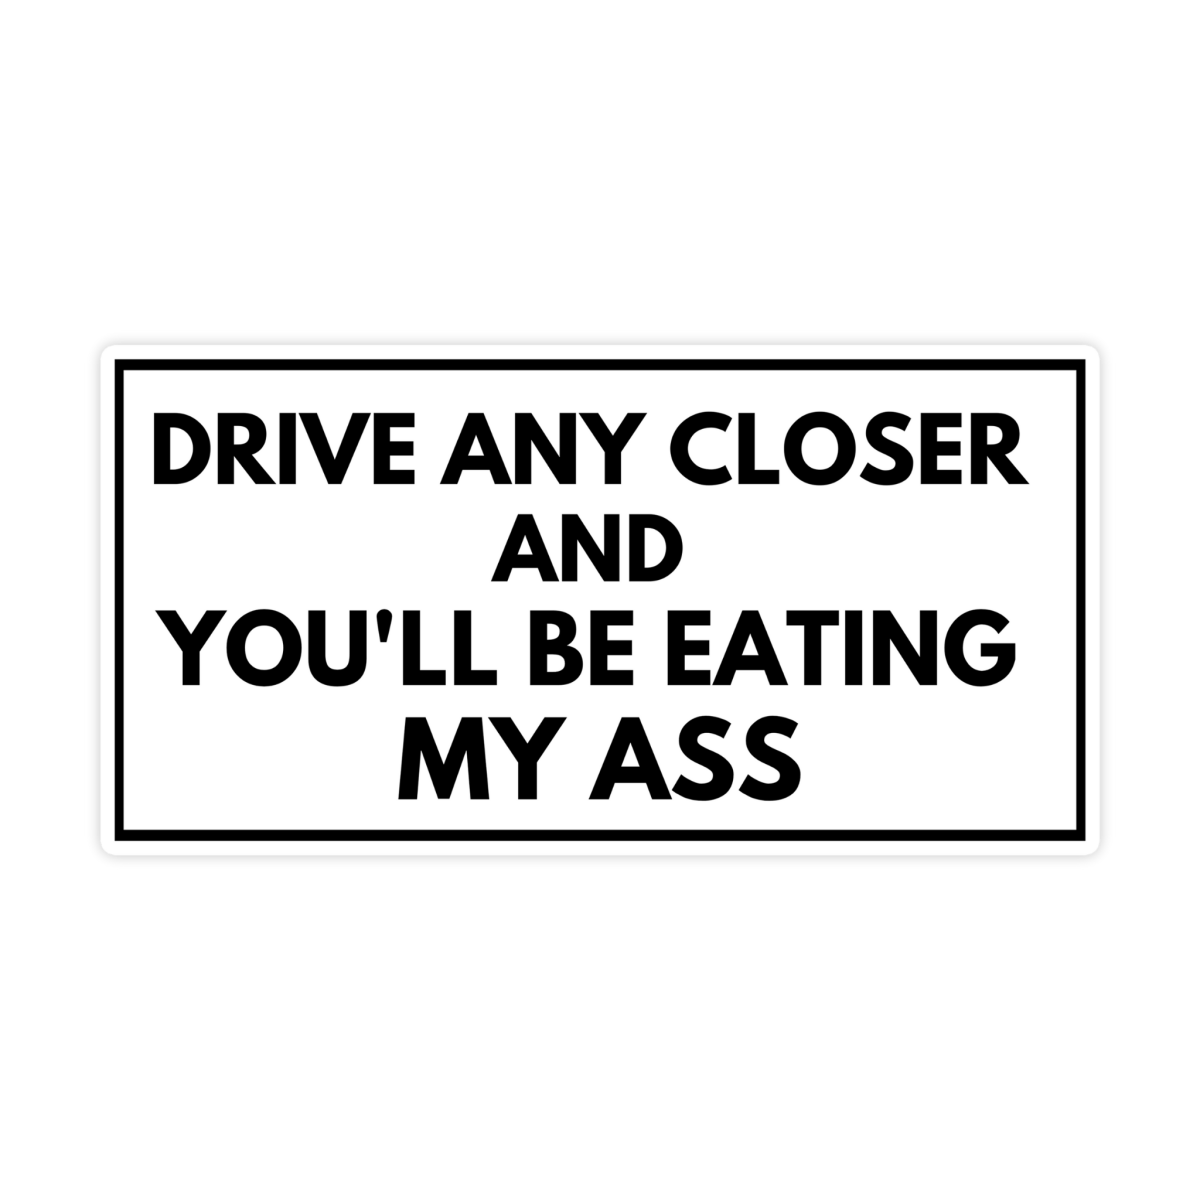 Drive Any Closer and You'll Be Eating My Ass Bumper Sticker - stickerbullDrive Any Closer and You'll Be Eating My Ass Bumper StickerRetail StickerstickerbullstickerbullDriveCloser_#102Drive Any Closer and You'll Be Eating My Ass Bumper Sticker